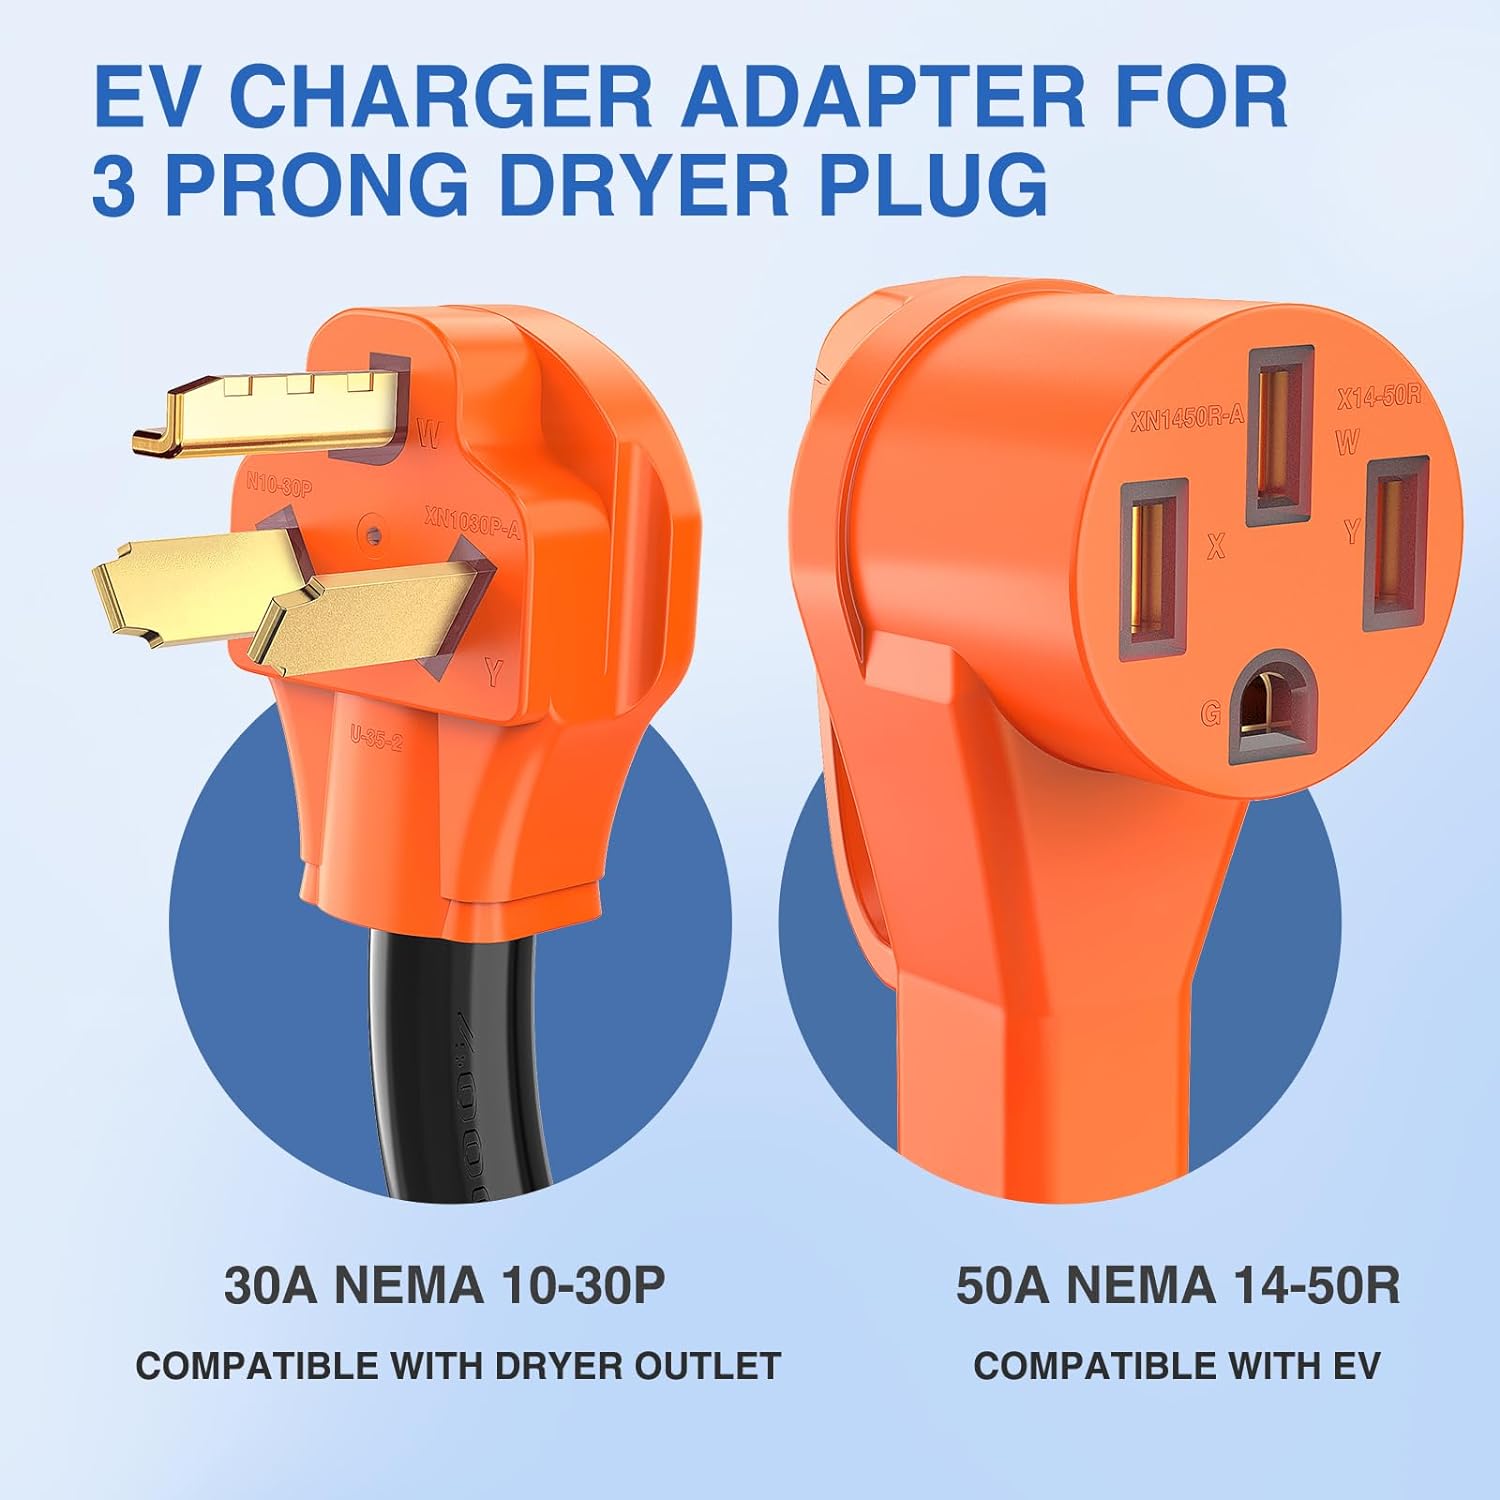 RV Parts EV Charger Adapter Cord 30 Amp to 50 Amp 3 Prong Pure Copper Old Dryer Outlet to EV Plug Conversion Heavy Duty 10 Gauge Wire 10-30P 14-50R 30M/50F for Level 2 EV Charging